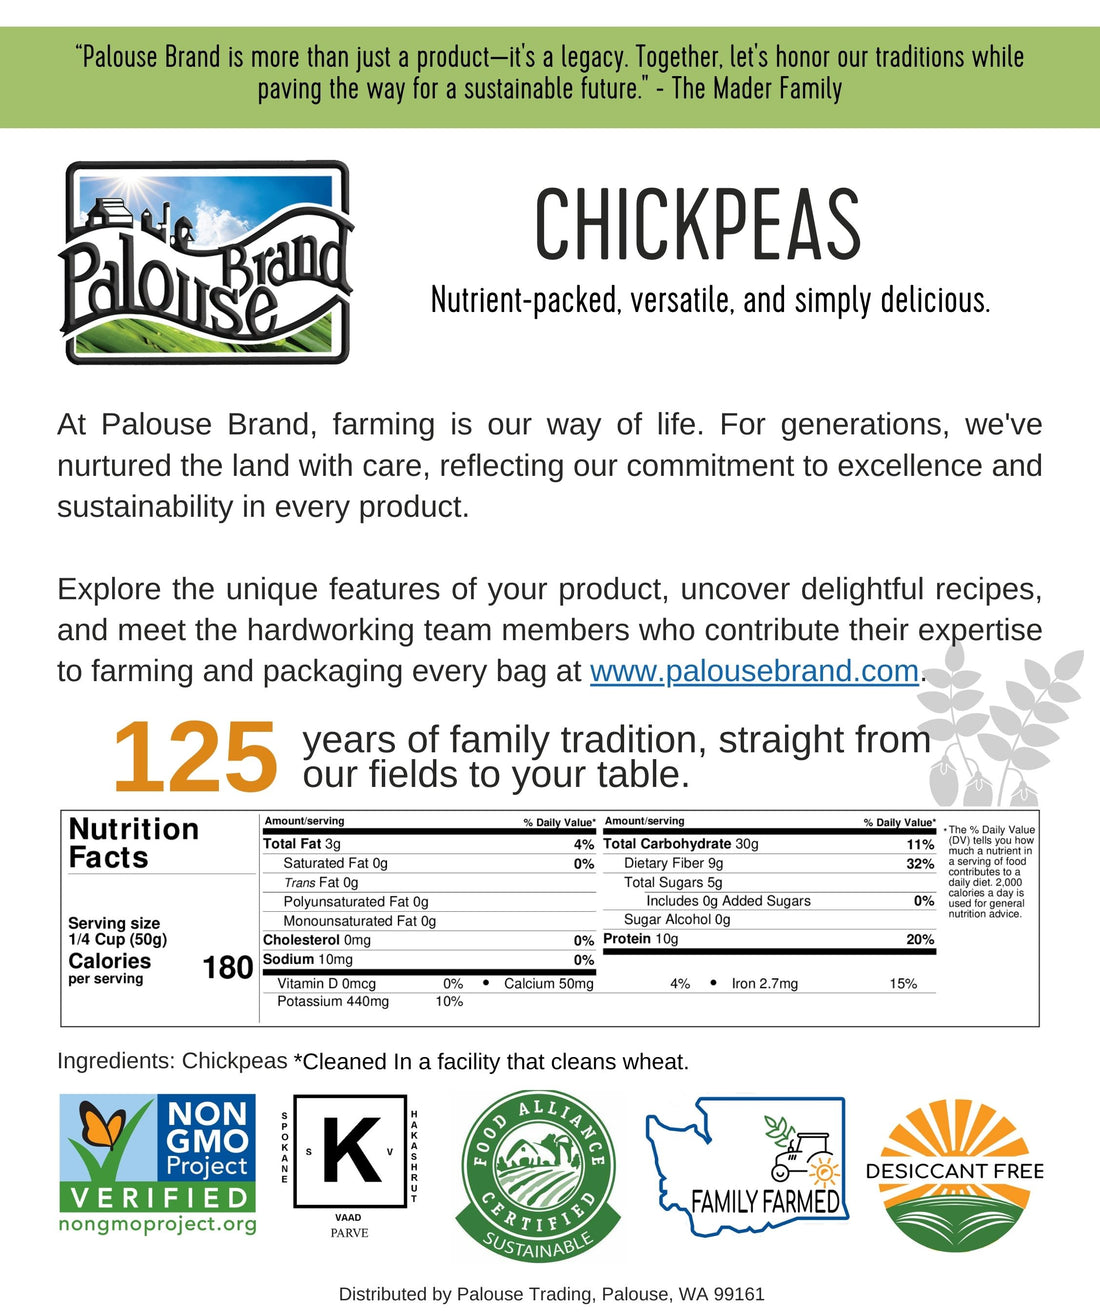 Nutrition Facts for Washington State Stone Ground: Chickpeas/Garbanzo Beans